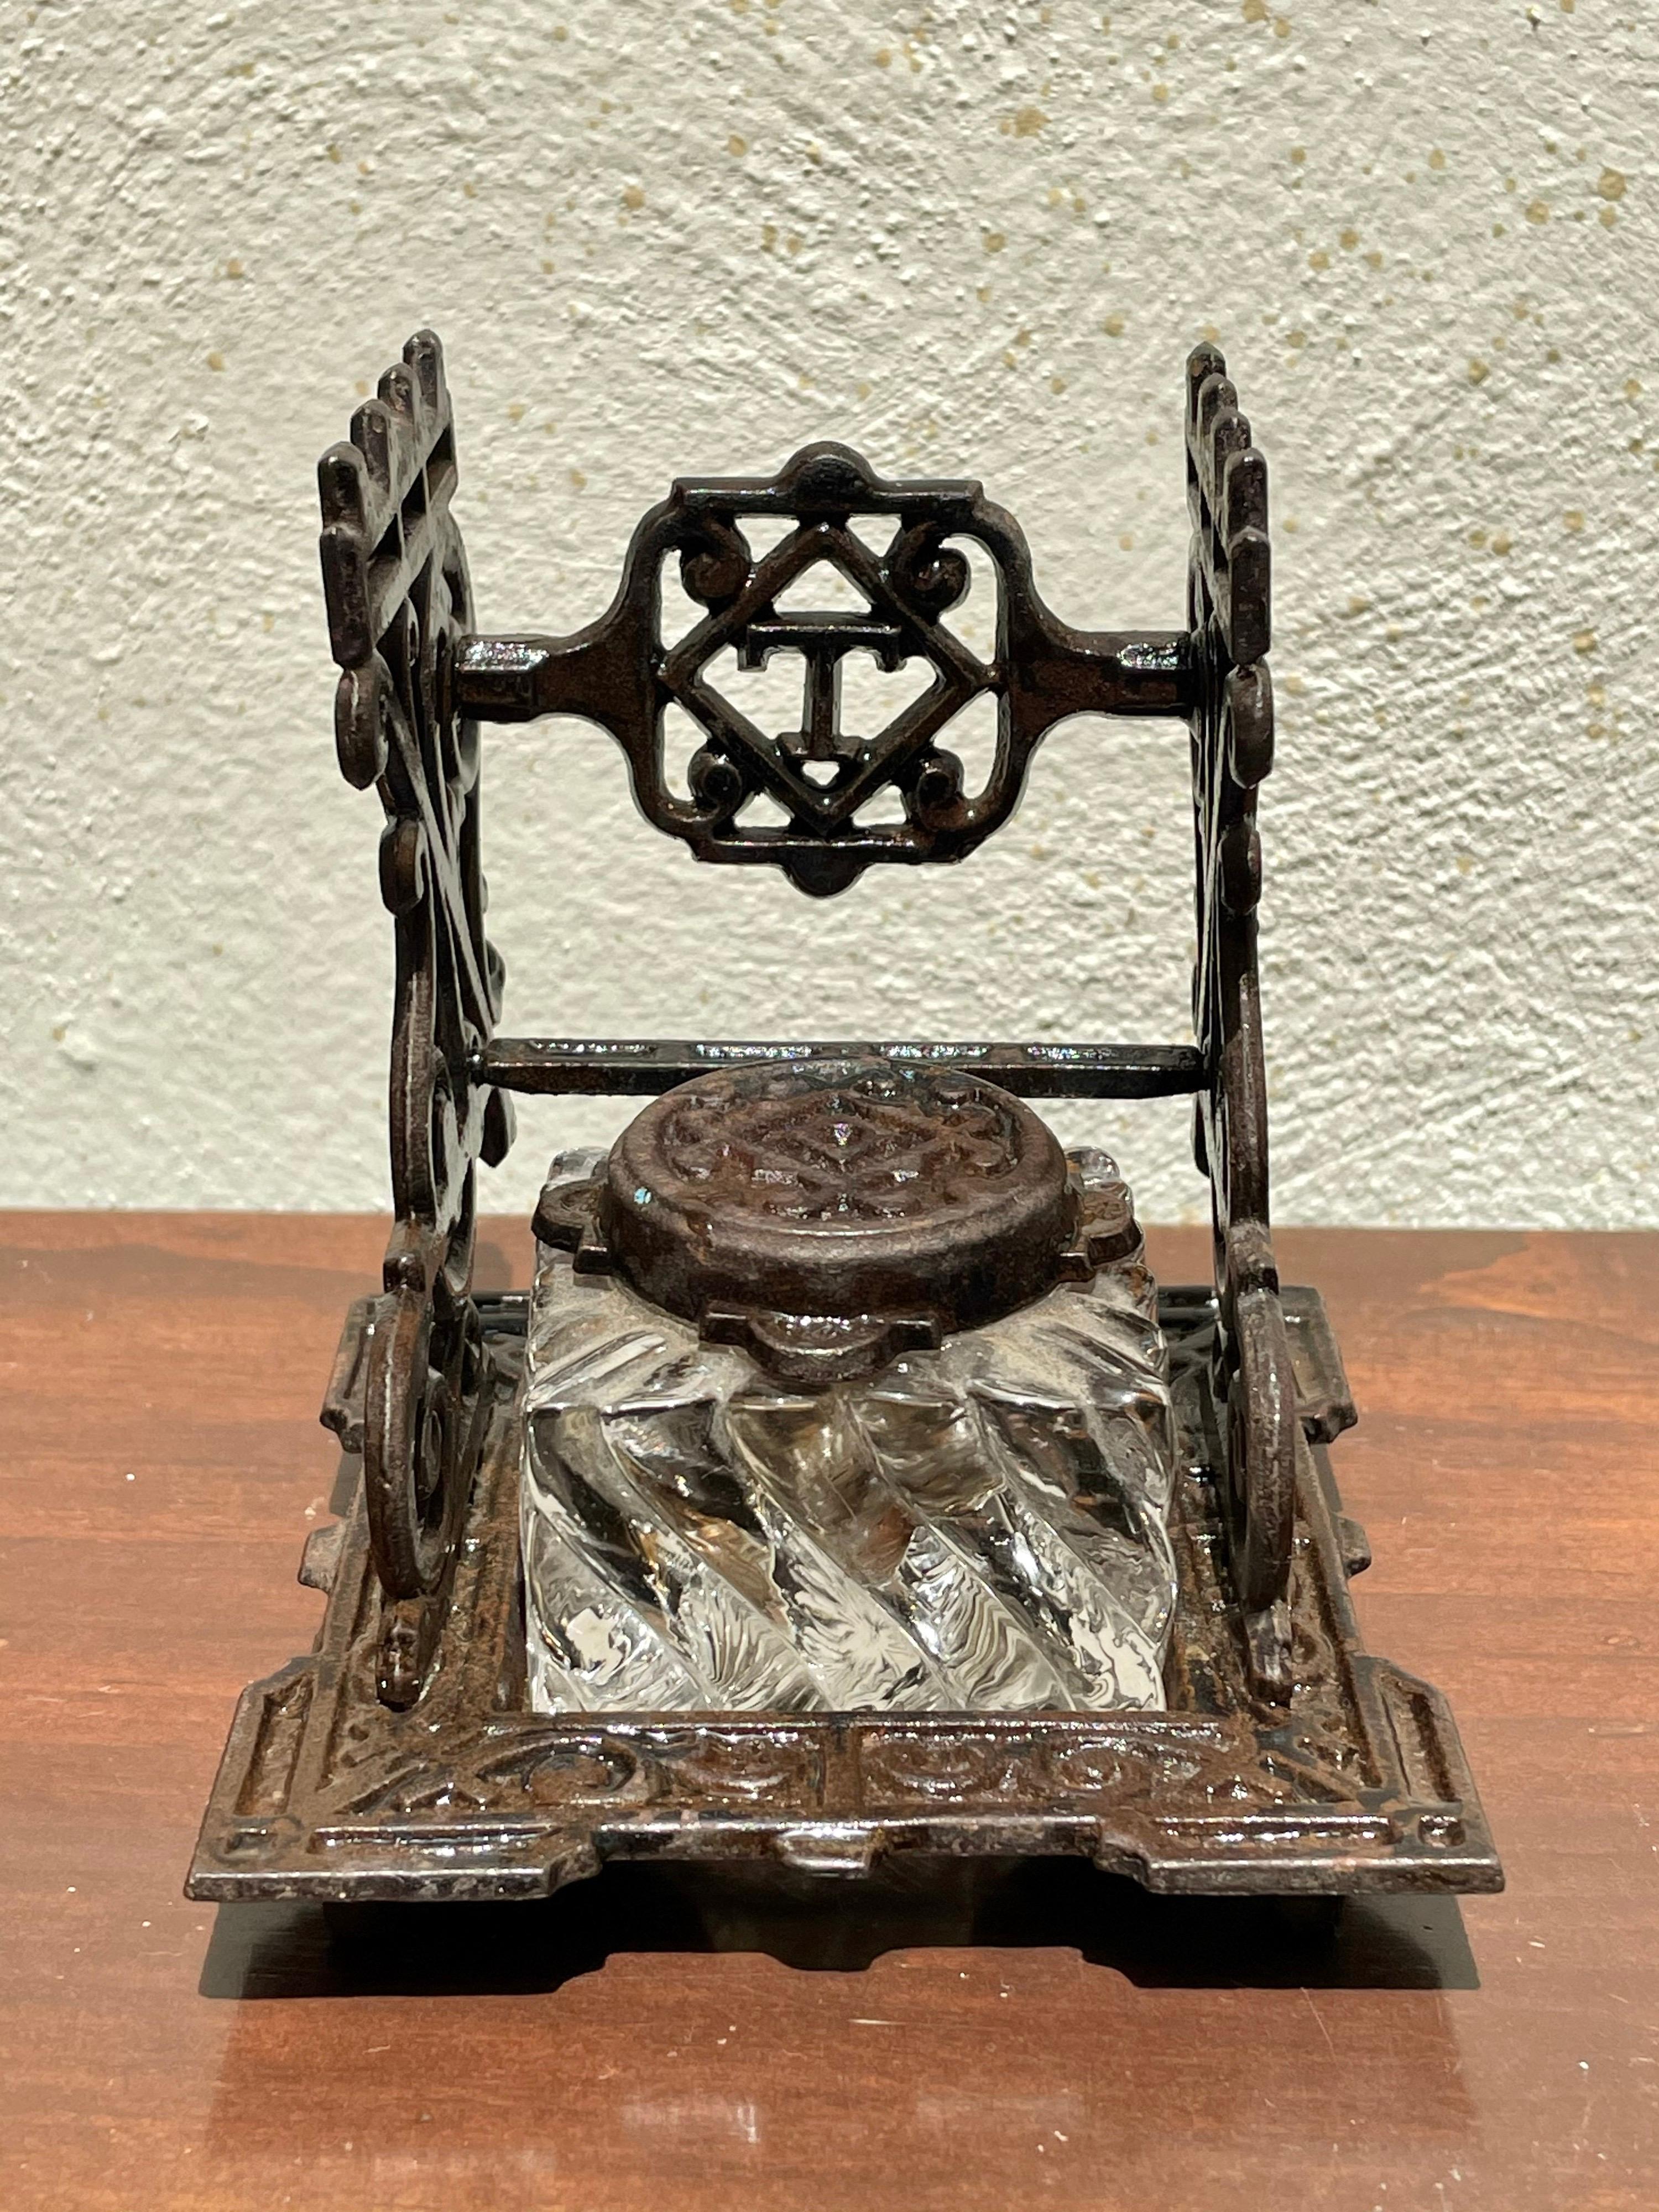 Antique Ink Well Tatum’s Standard, crystal well, 3 pen quill rests, hinged lid.

This piece is cast iron and crystal.
It is a beauty!